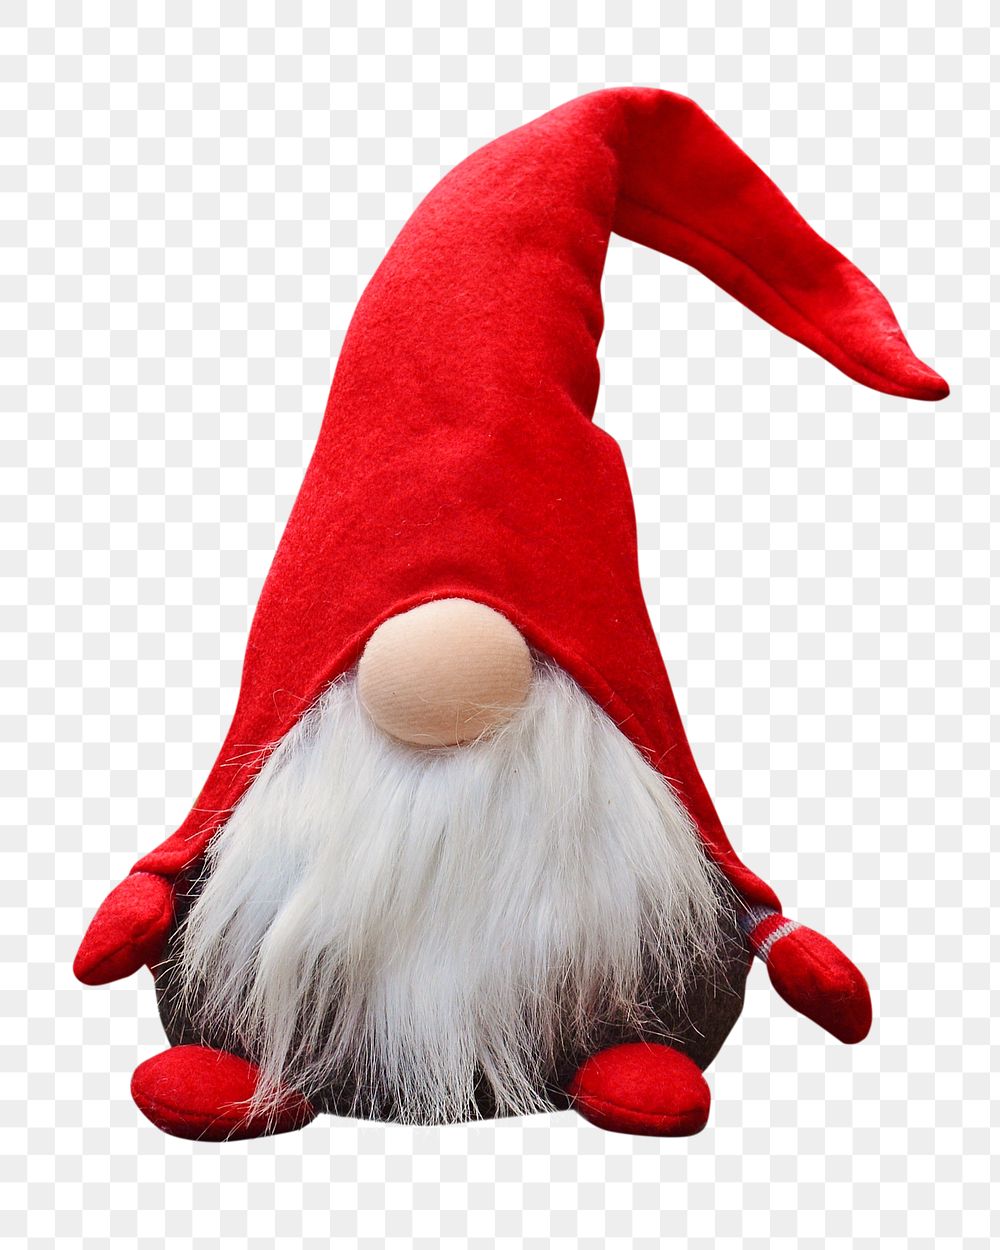 Red gnome png, transparent background